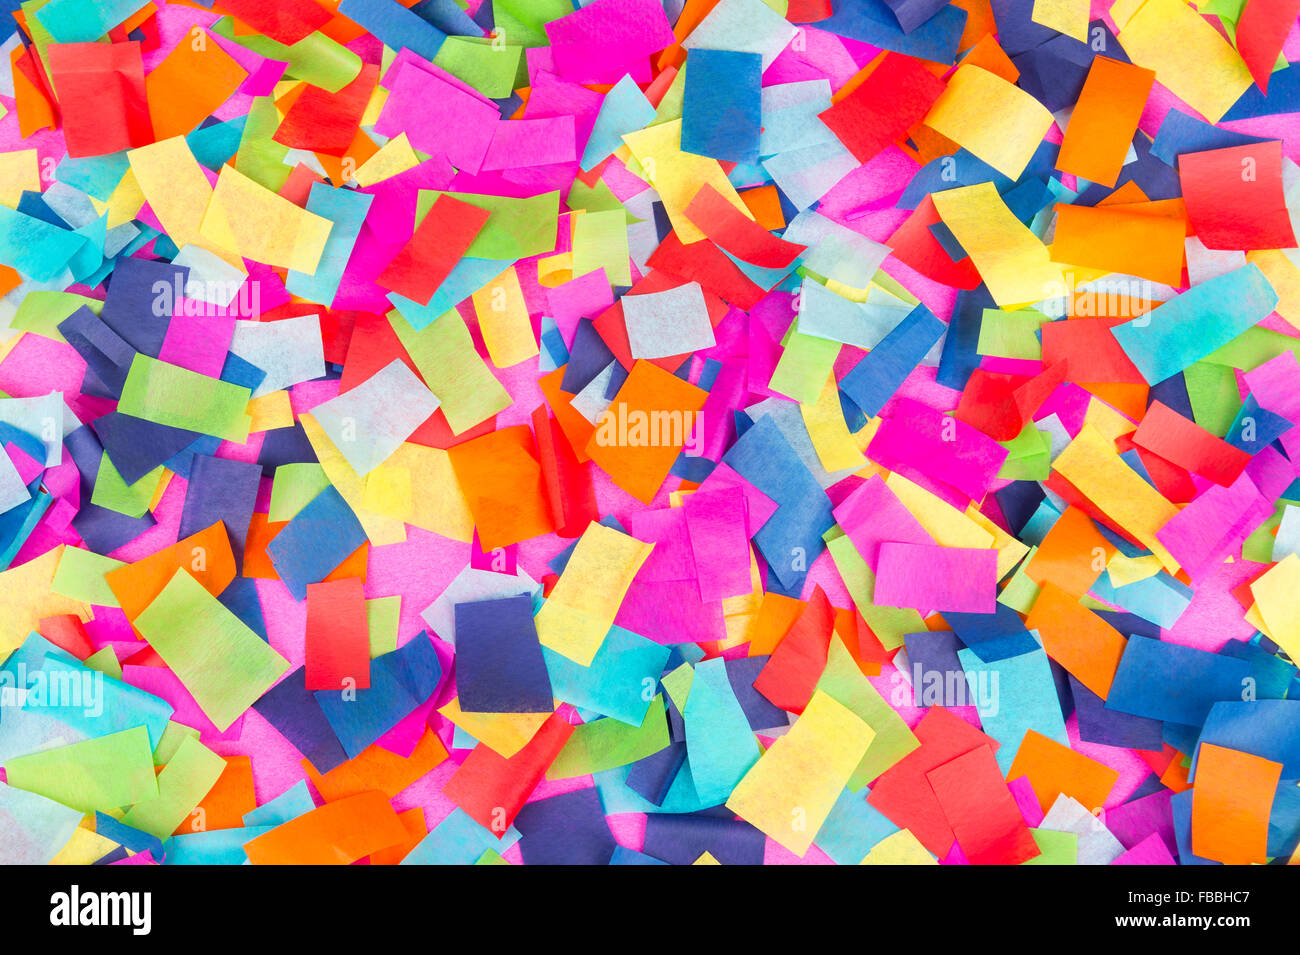 Brightly colored paper confetti background featuring red, yellow, blue,  green, orange, and bright pink carnival colors Stock Photo